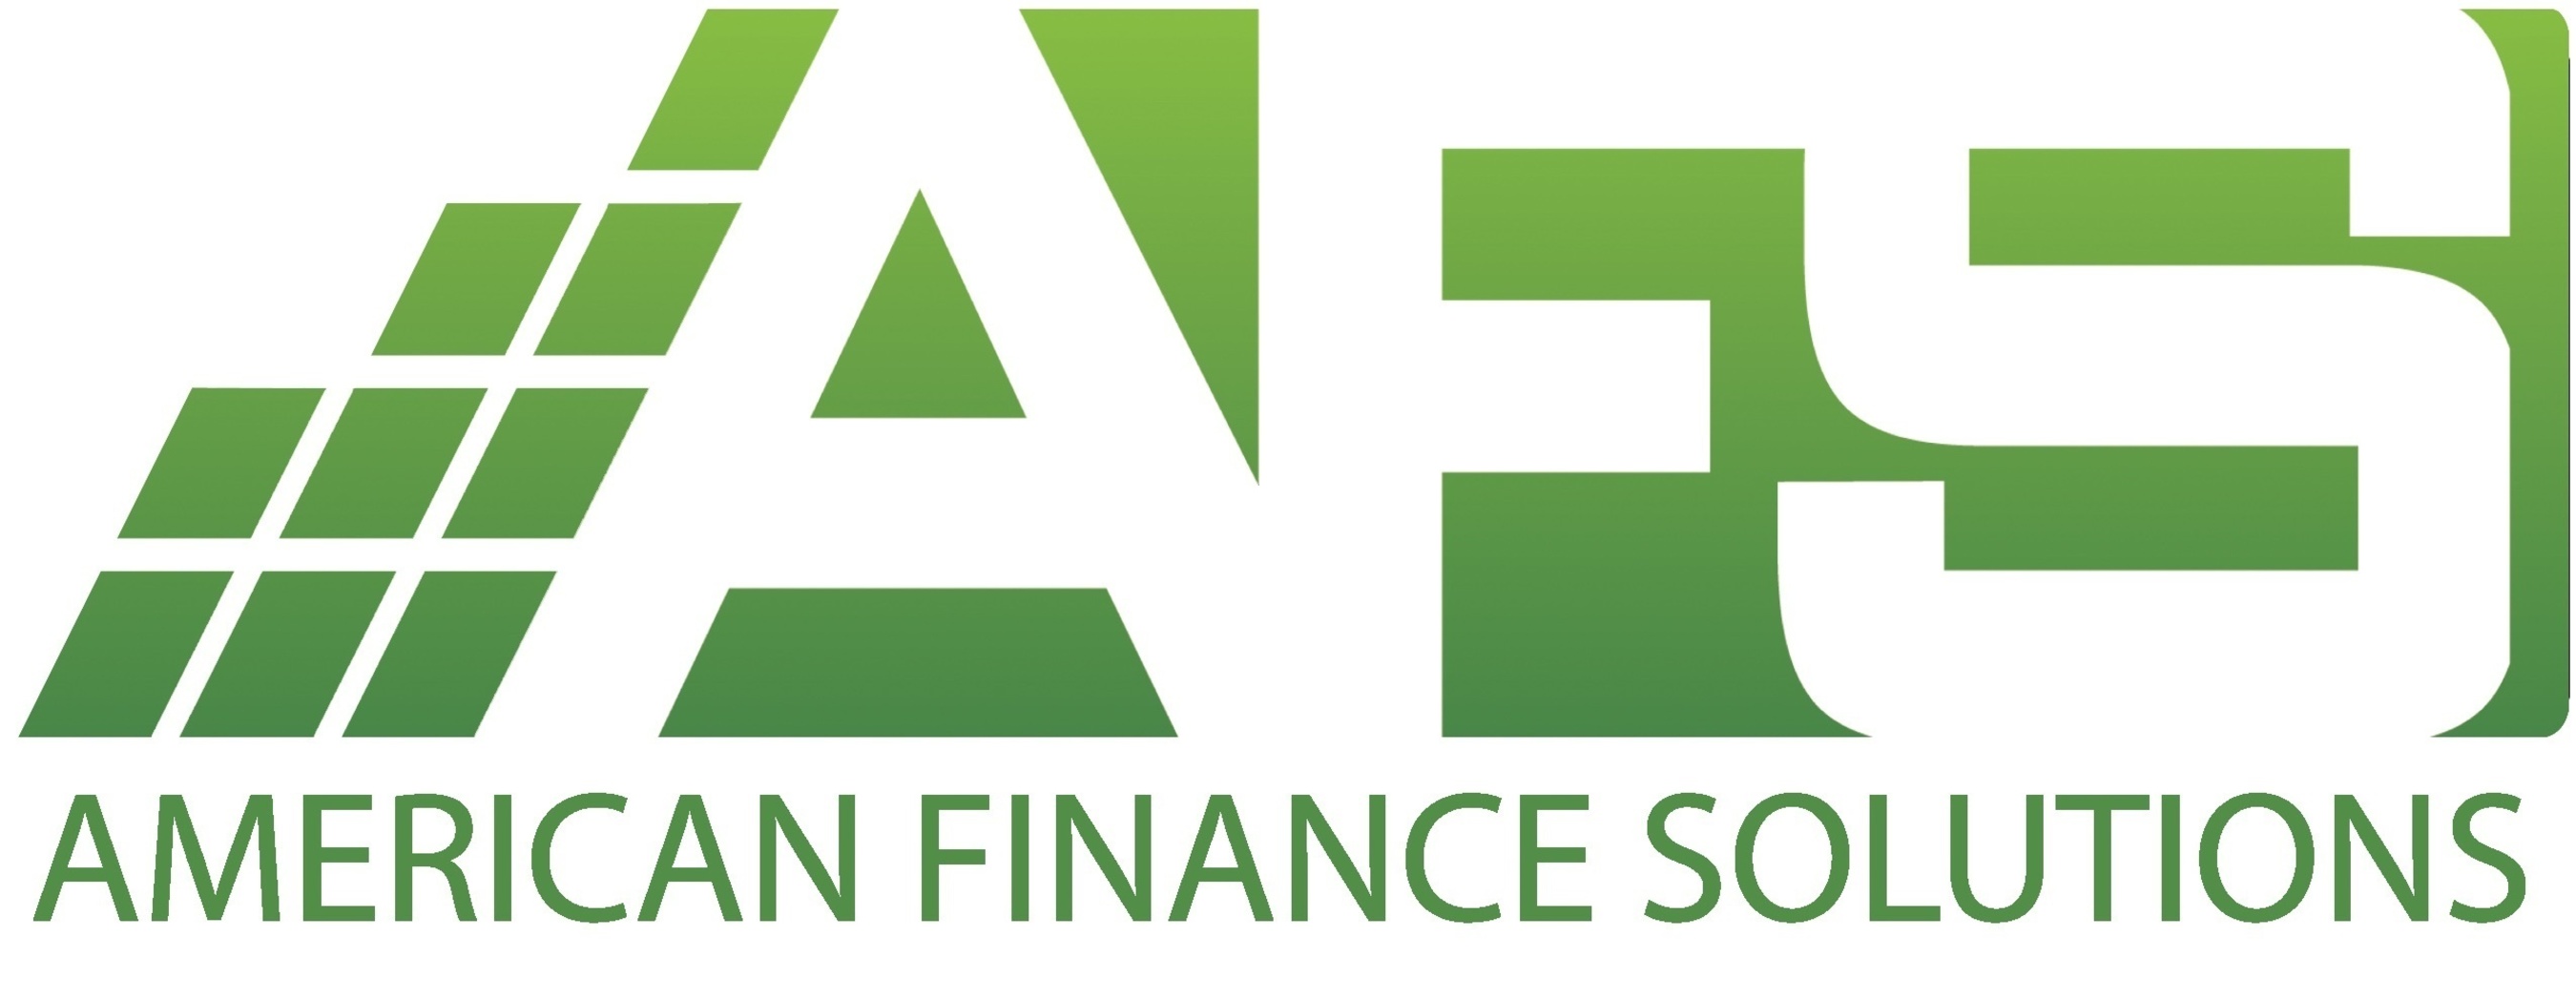 American Finance Solutions Receives Significant Private Equity Investment from CapFin Partners (PRNewsFoto/American Finance Solutions)